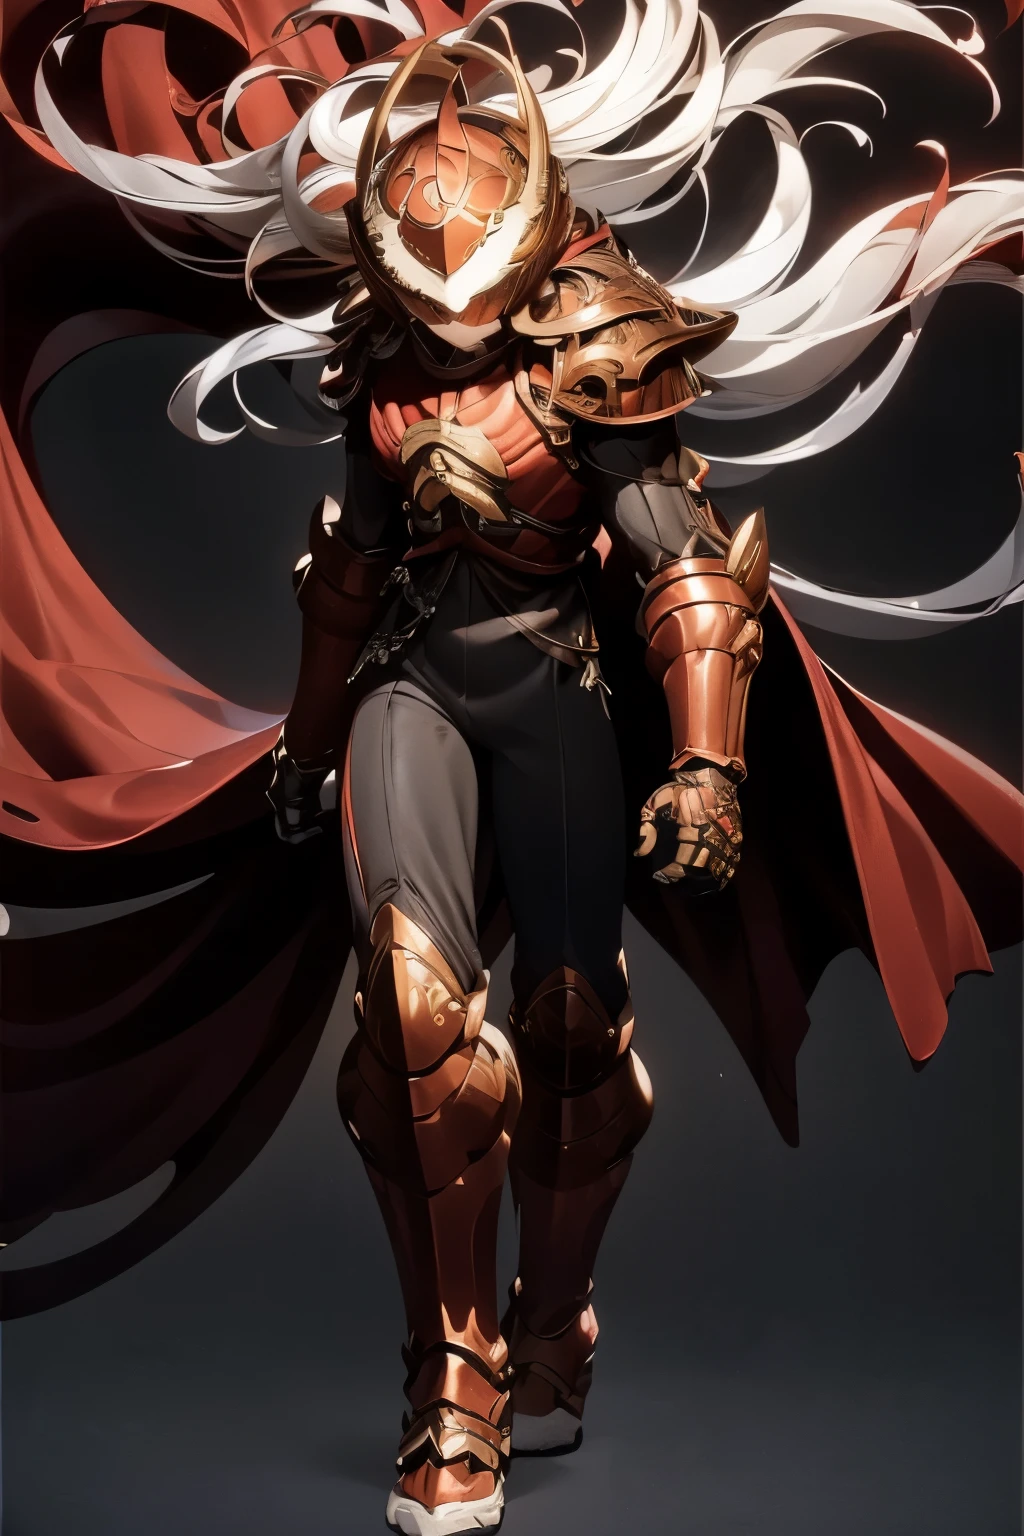 masutepiece, Best Quality,Detailed picture、 1boy, ,a 10 year old boy、Height of the 、White hair、 ,Red and brass armor with the image of a swan and a samurai , Black bodysuit, long boots, Full body, gloves, Holding a brass sword、Red and white helmet with the image of a swan, red footwear, Close-up perspective on a person、, Solo,Calm atmosphere、 Cyberpunk city background.simple background